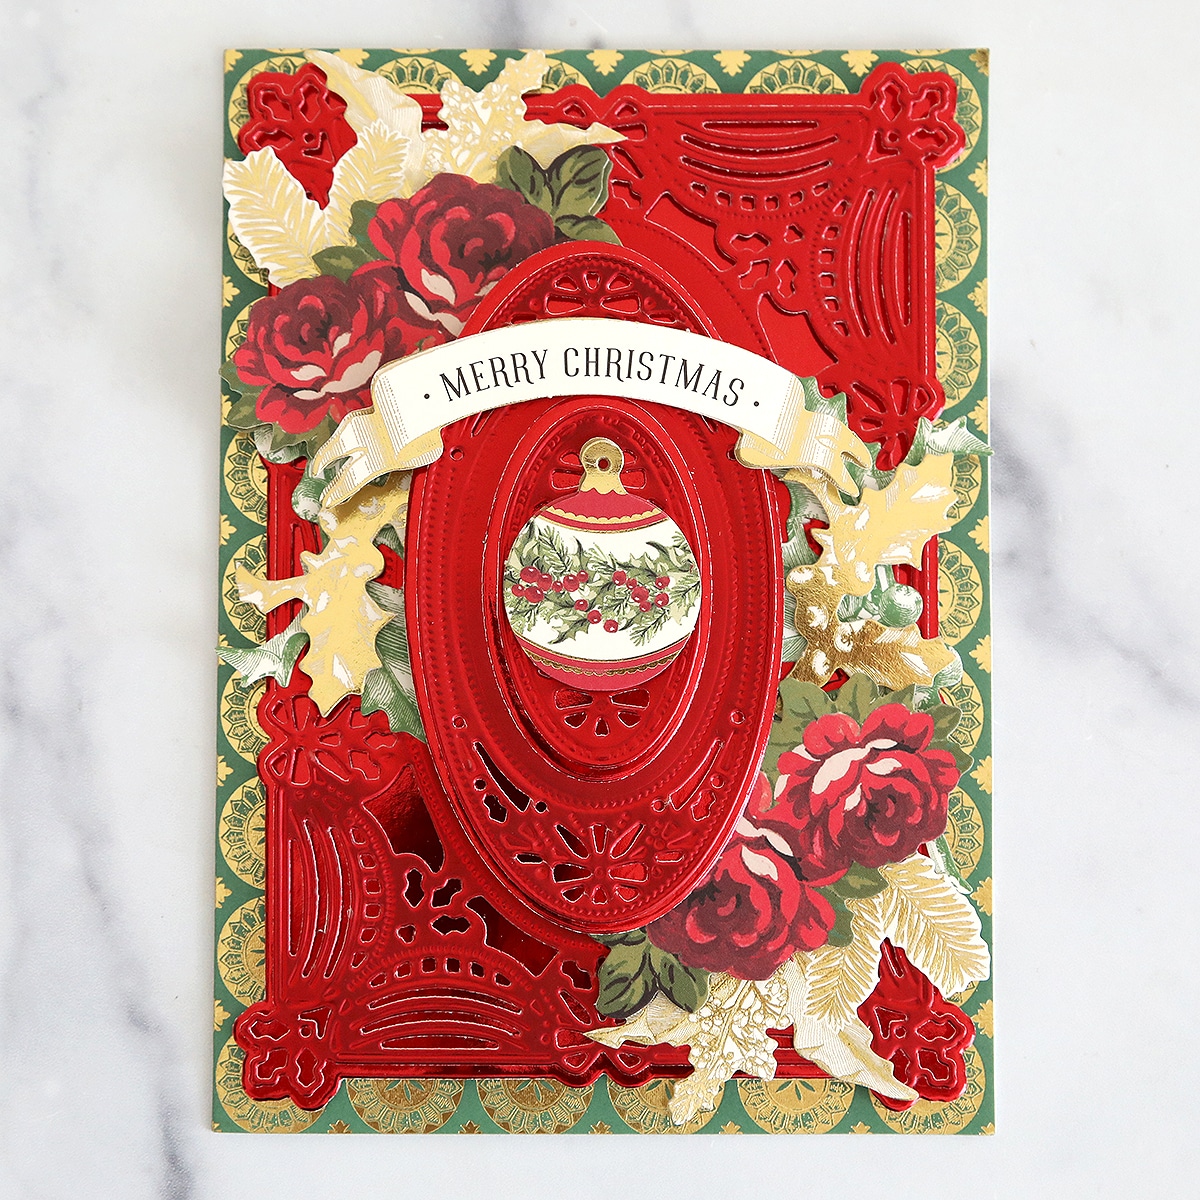 A christmas card with a red ornament and roses.